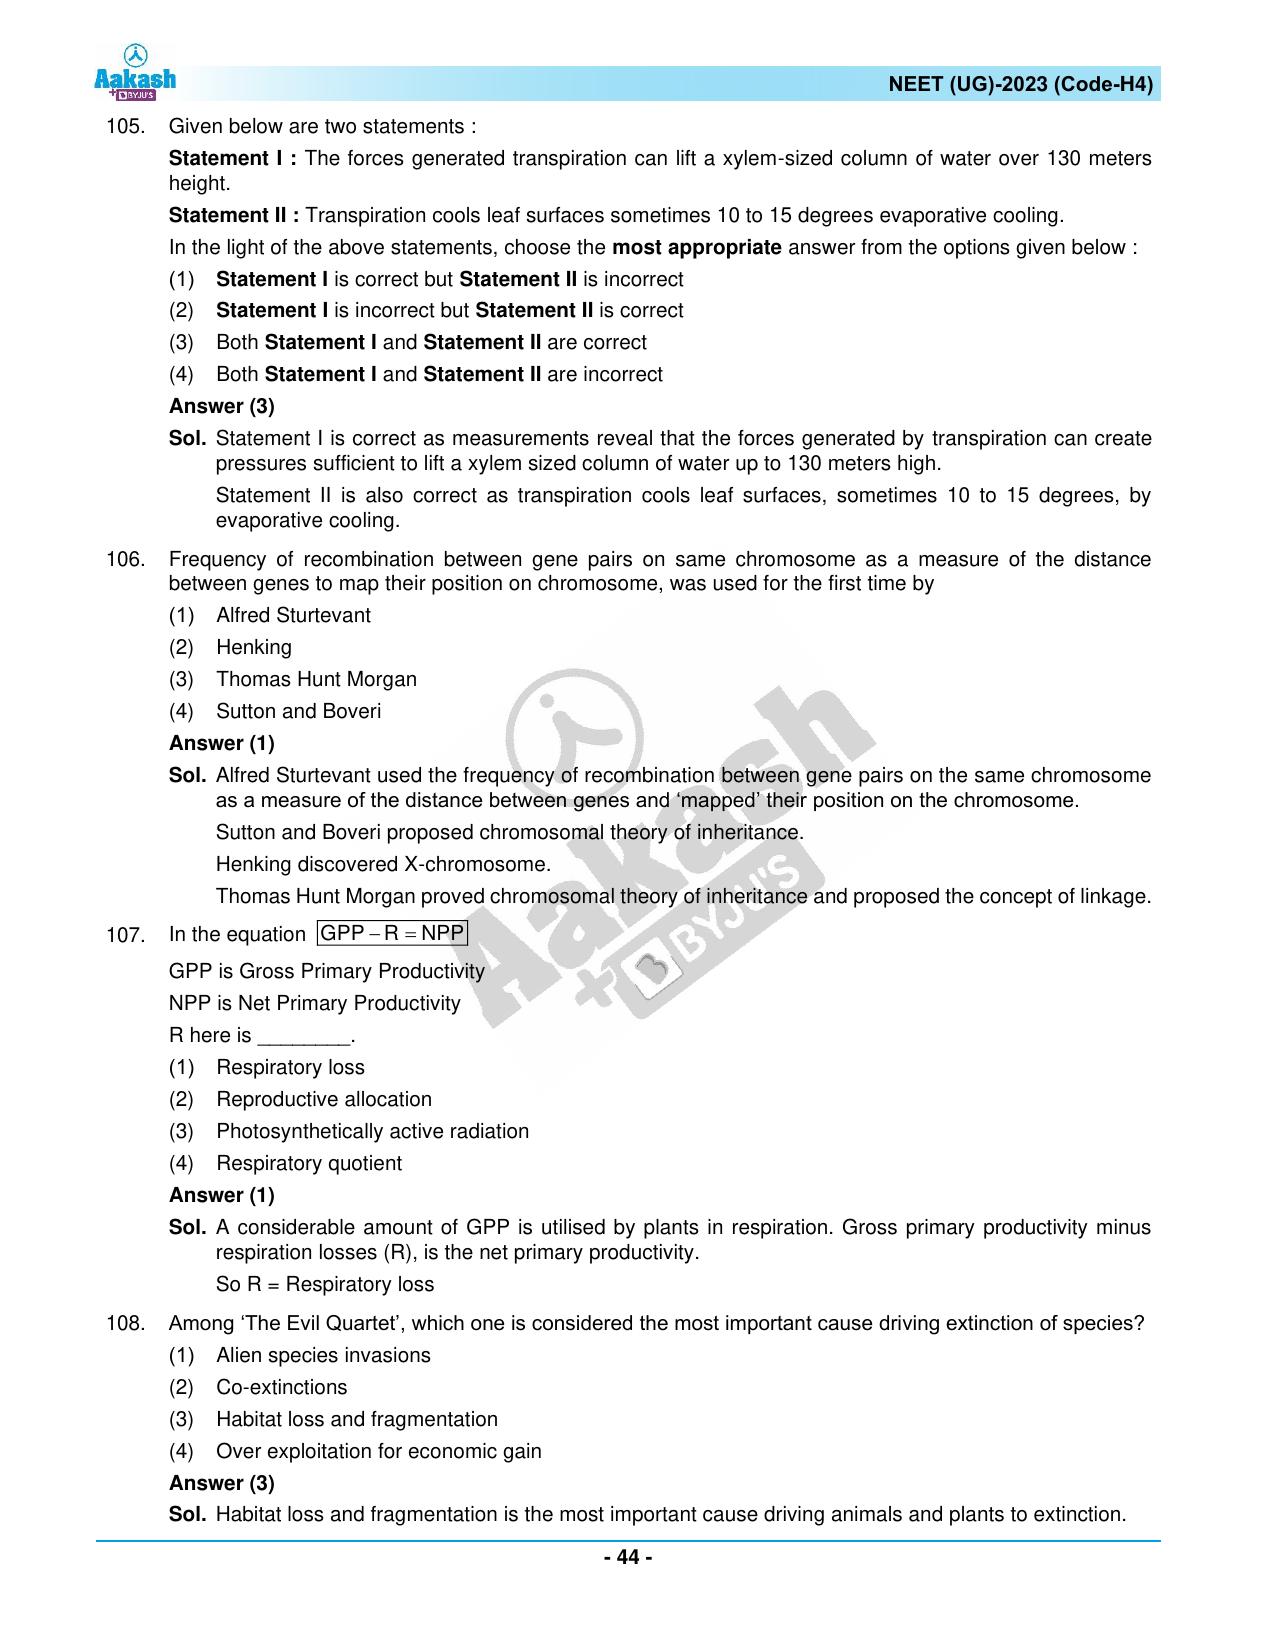 NEET 2023 Question Paper H4 - Page 44